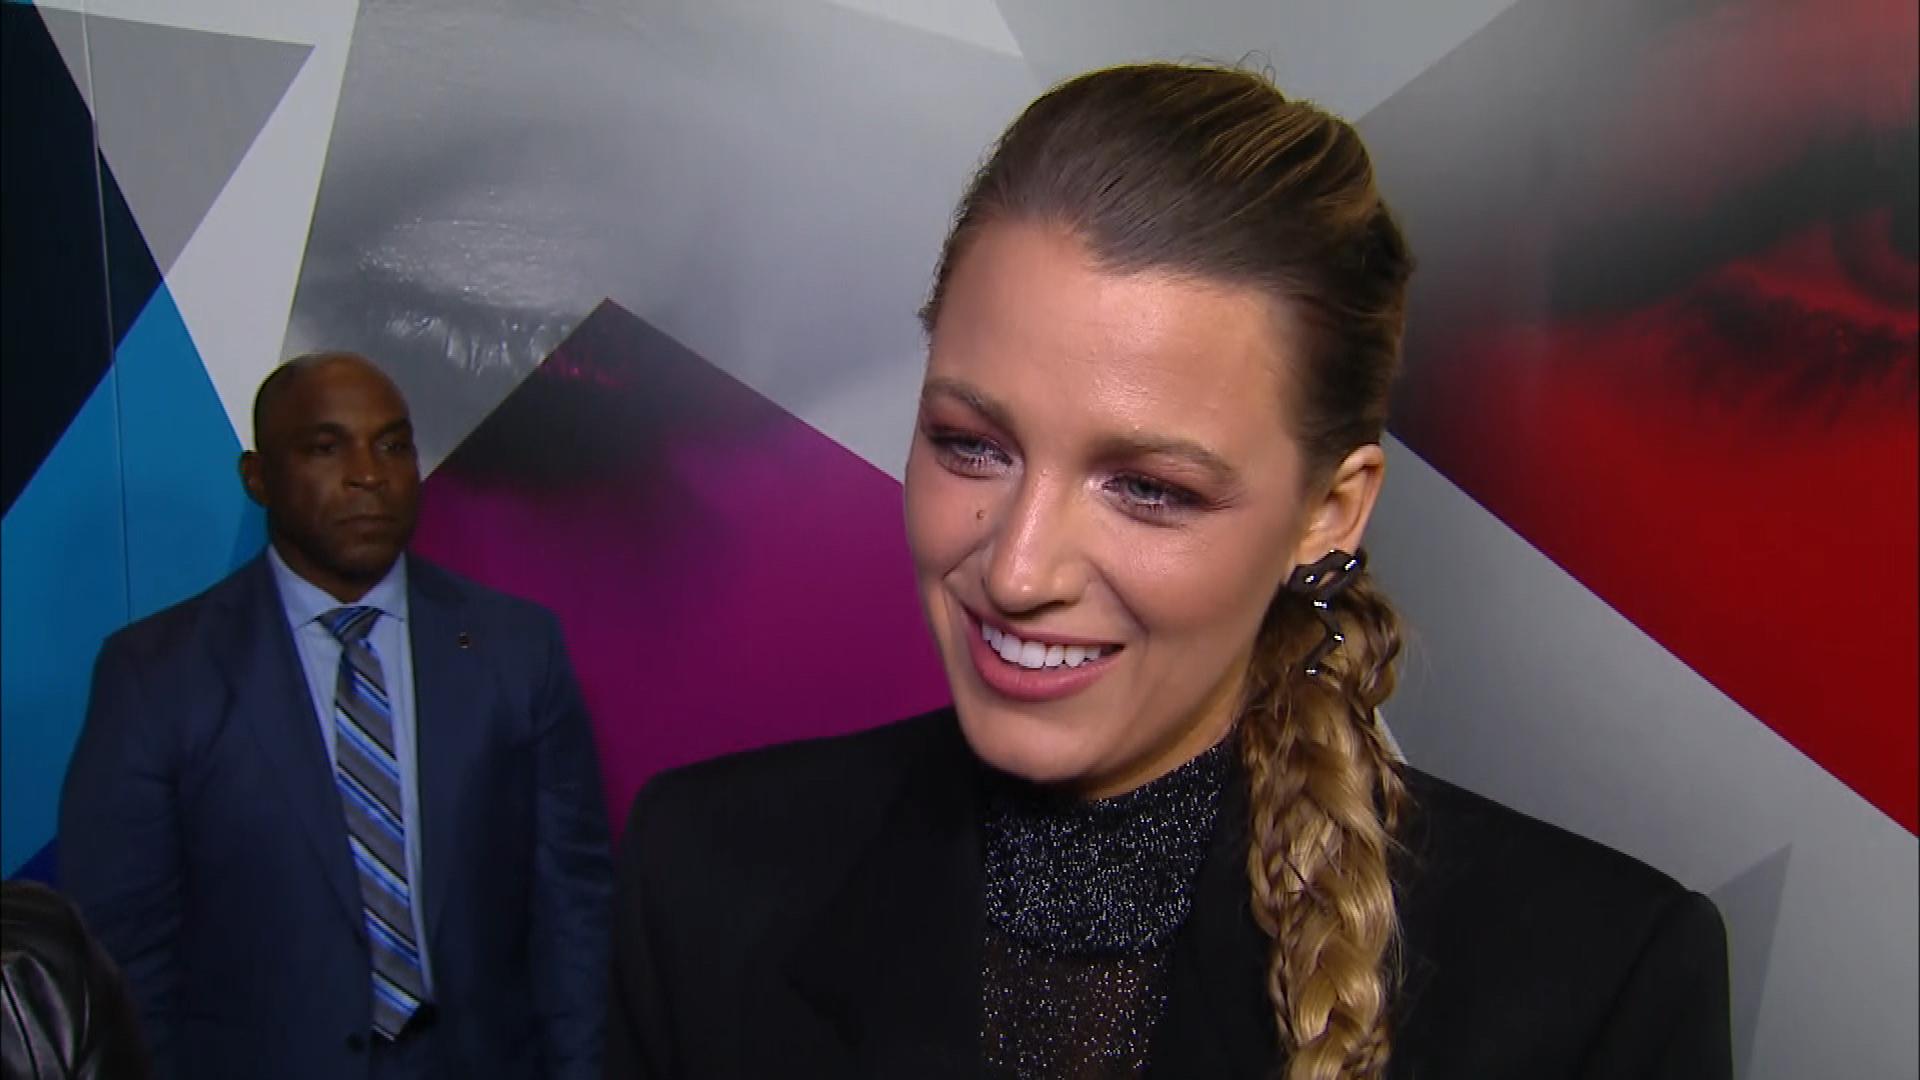 Blake Lively's 'A Simple Favor' Press Tour Is a Lesson in Power